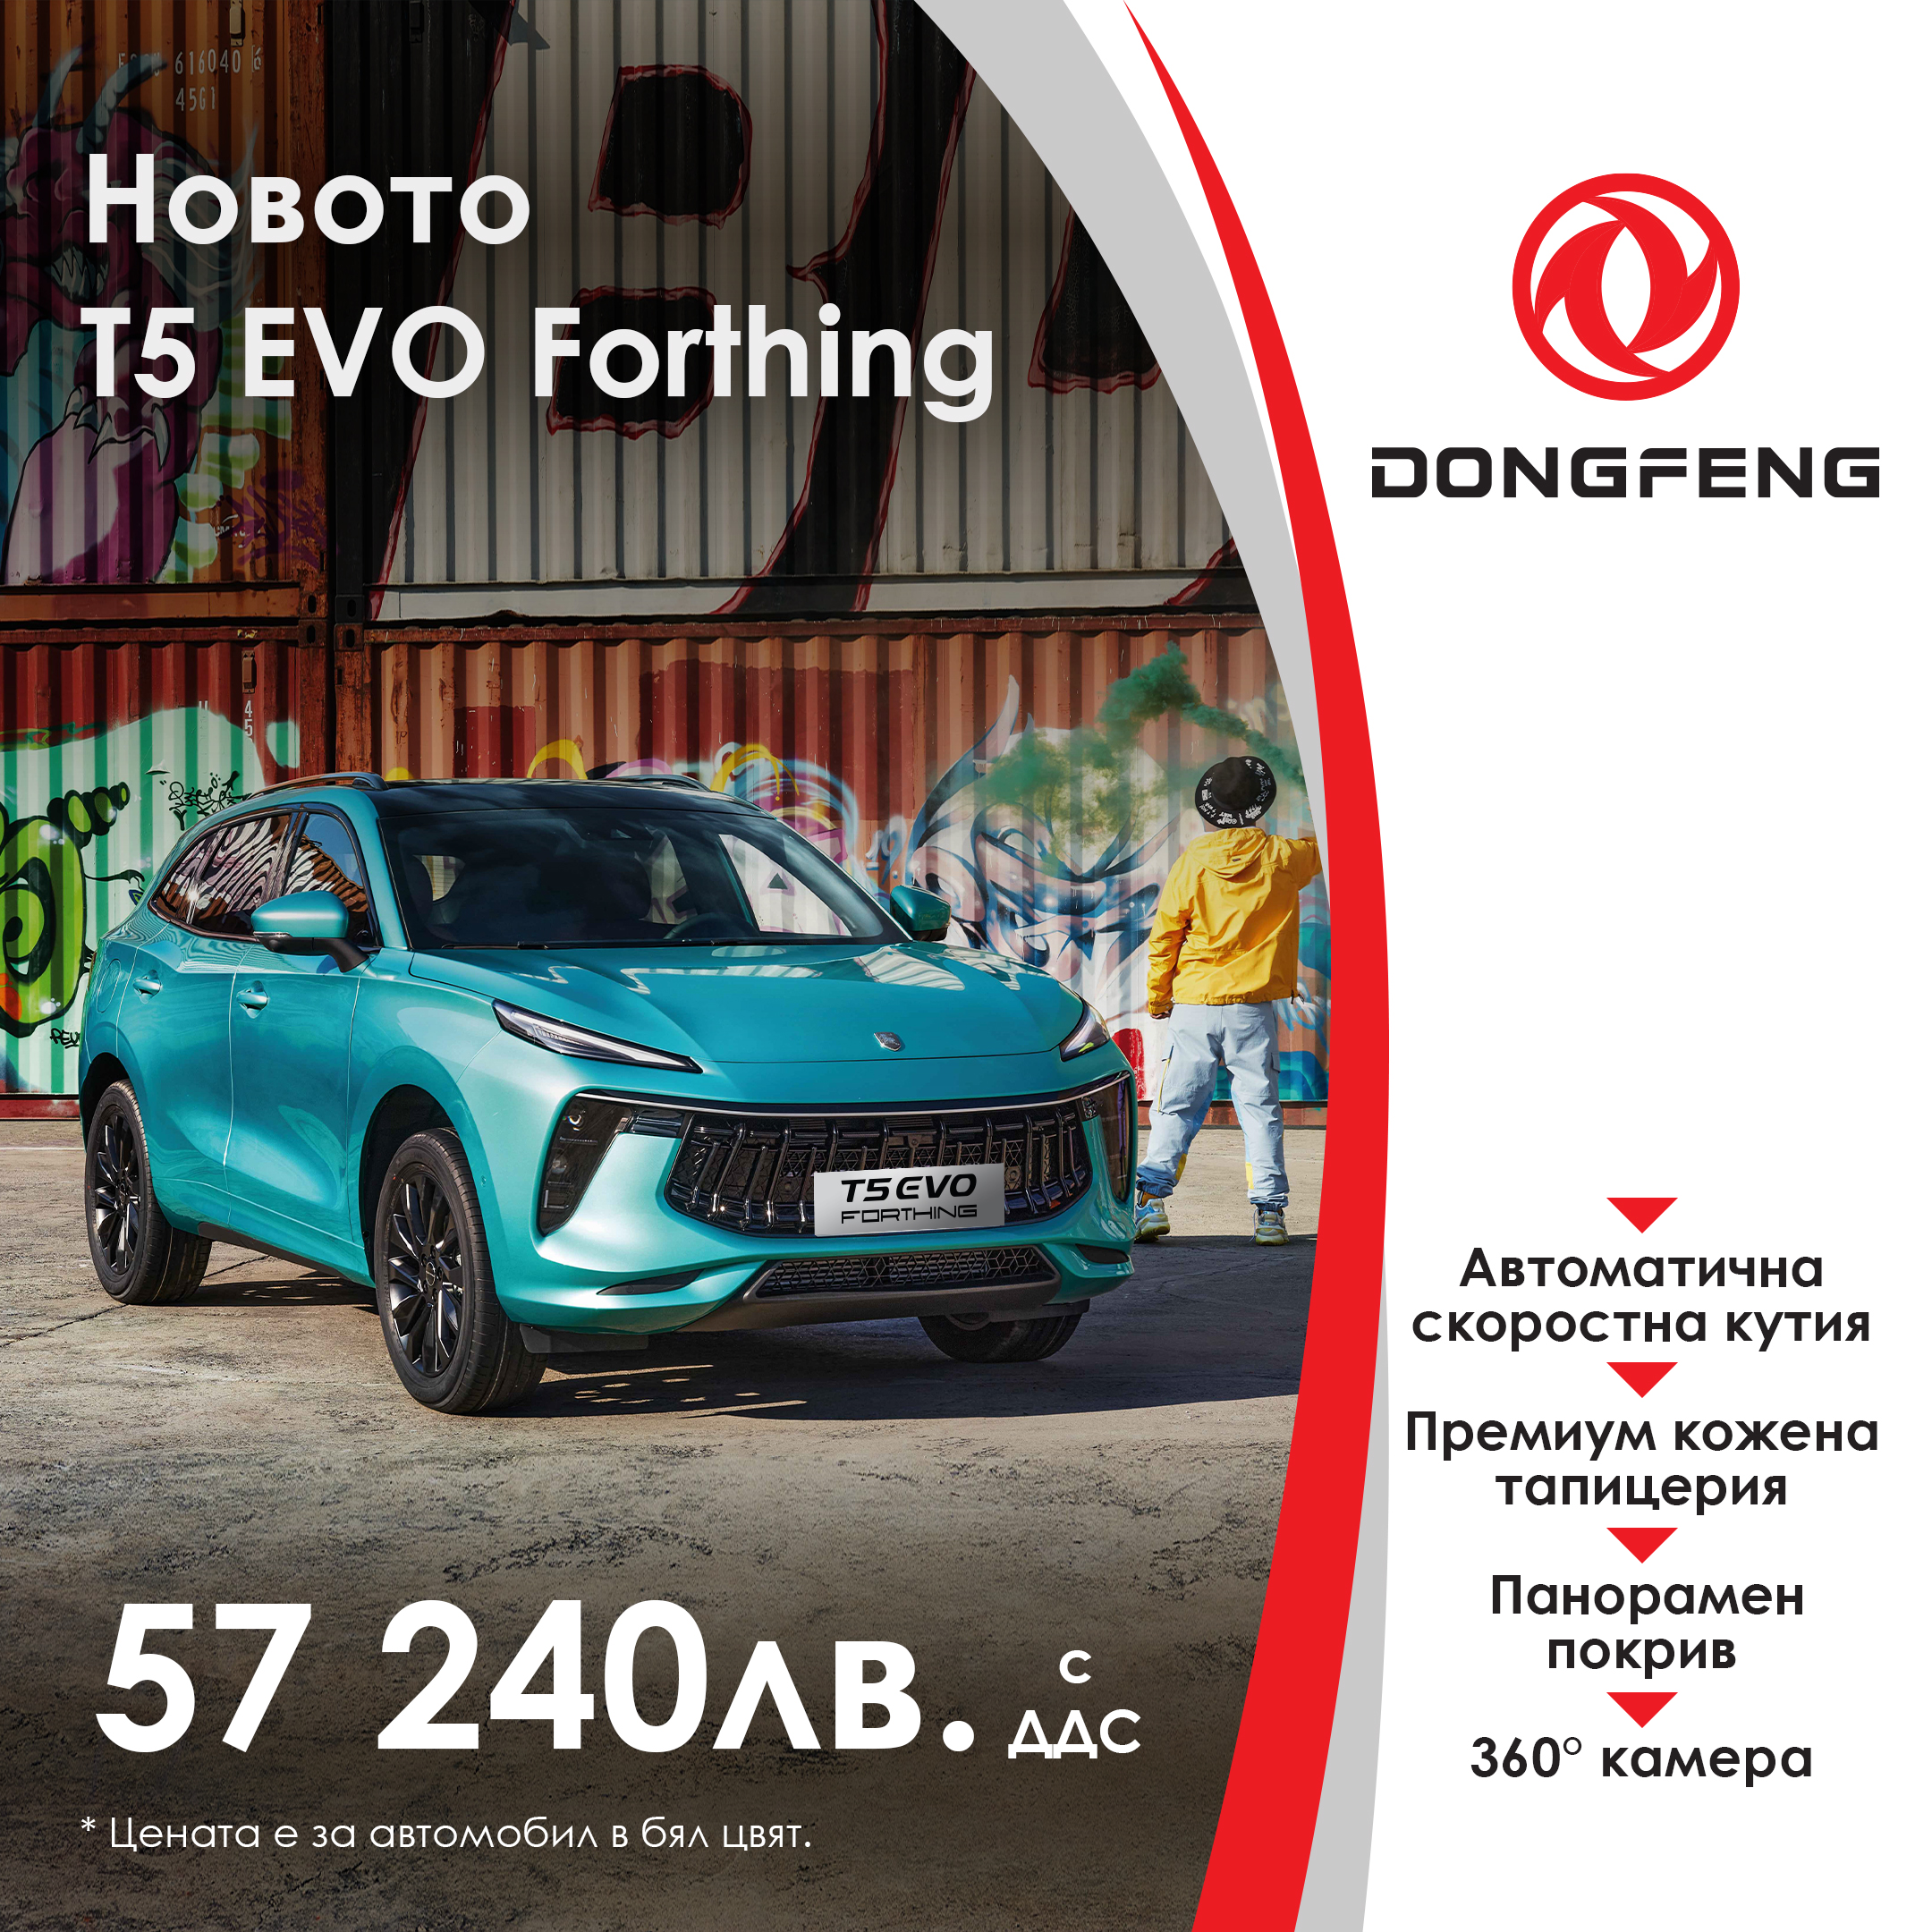 Dongfeng T5 Evo Forthing